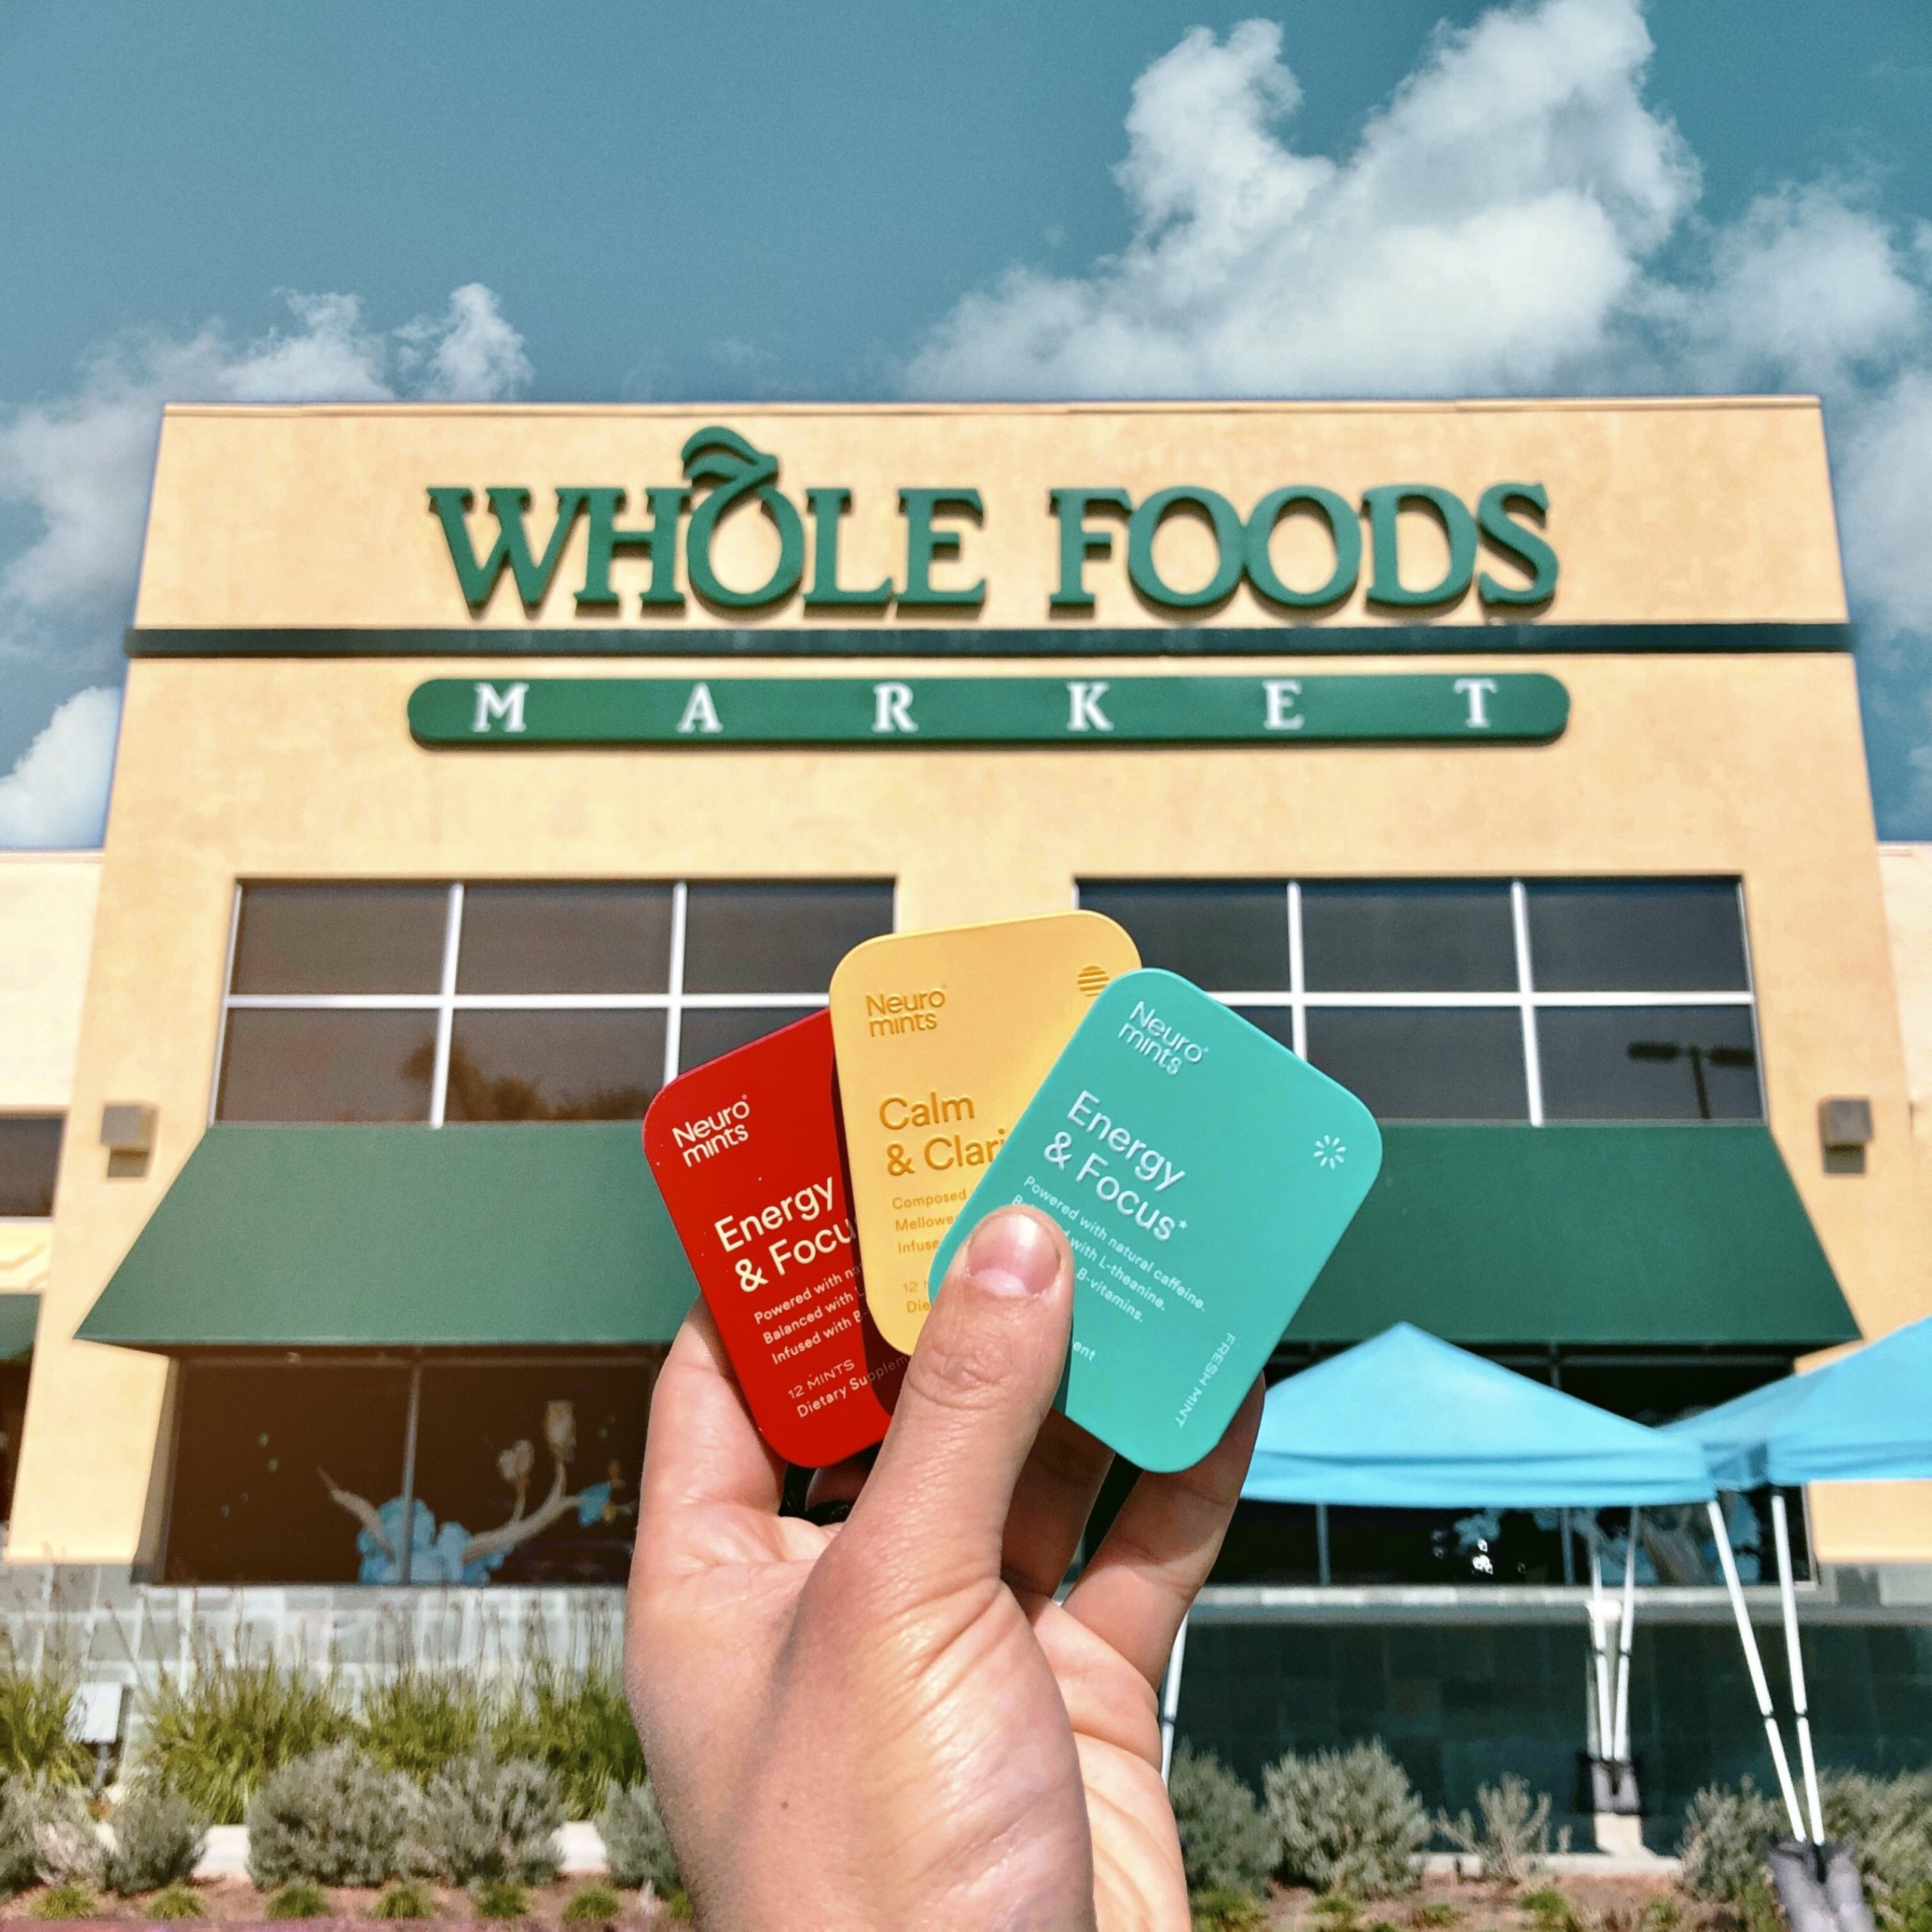 Neuro's Functional Gum And Mints Now Available In Whole Foods Nationwide